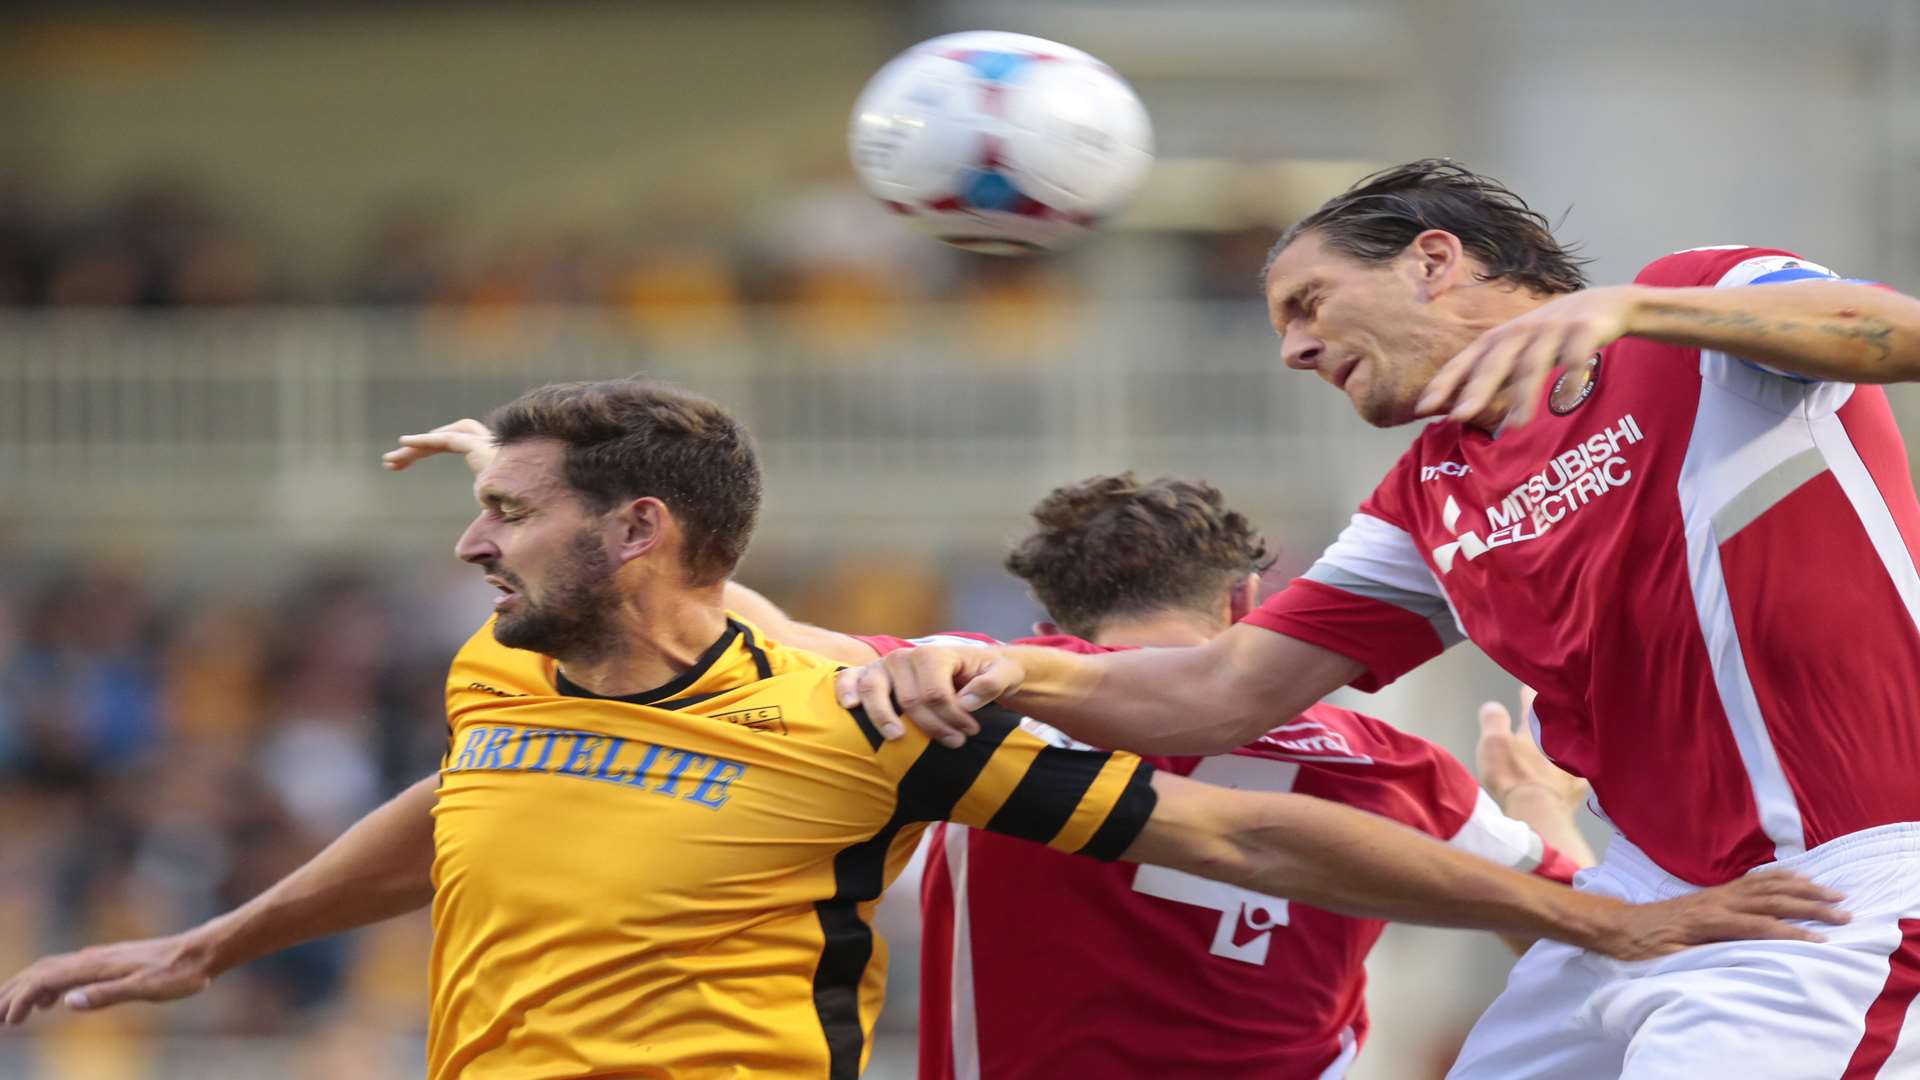 Maidstone fans must buy tickets in advance if they want to see the return game with Ebbsfleet Picture: Martin Apps